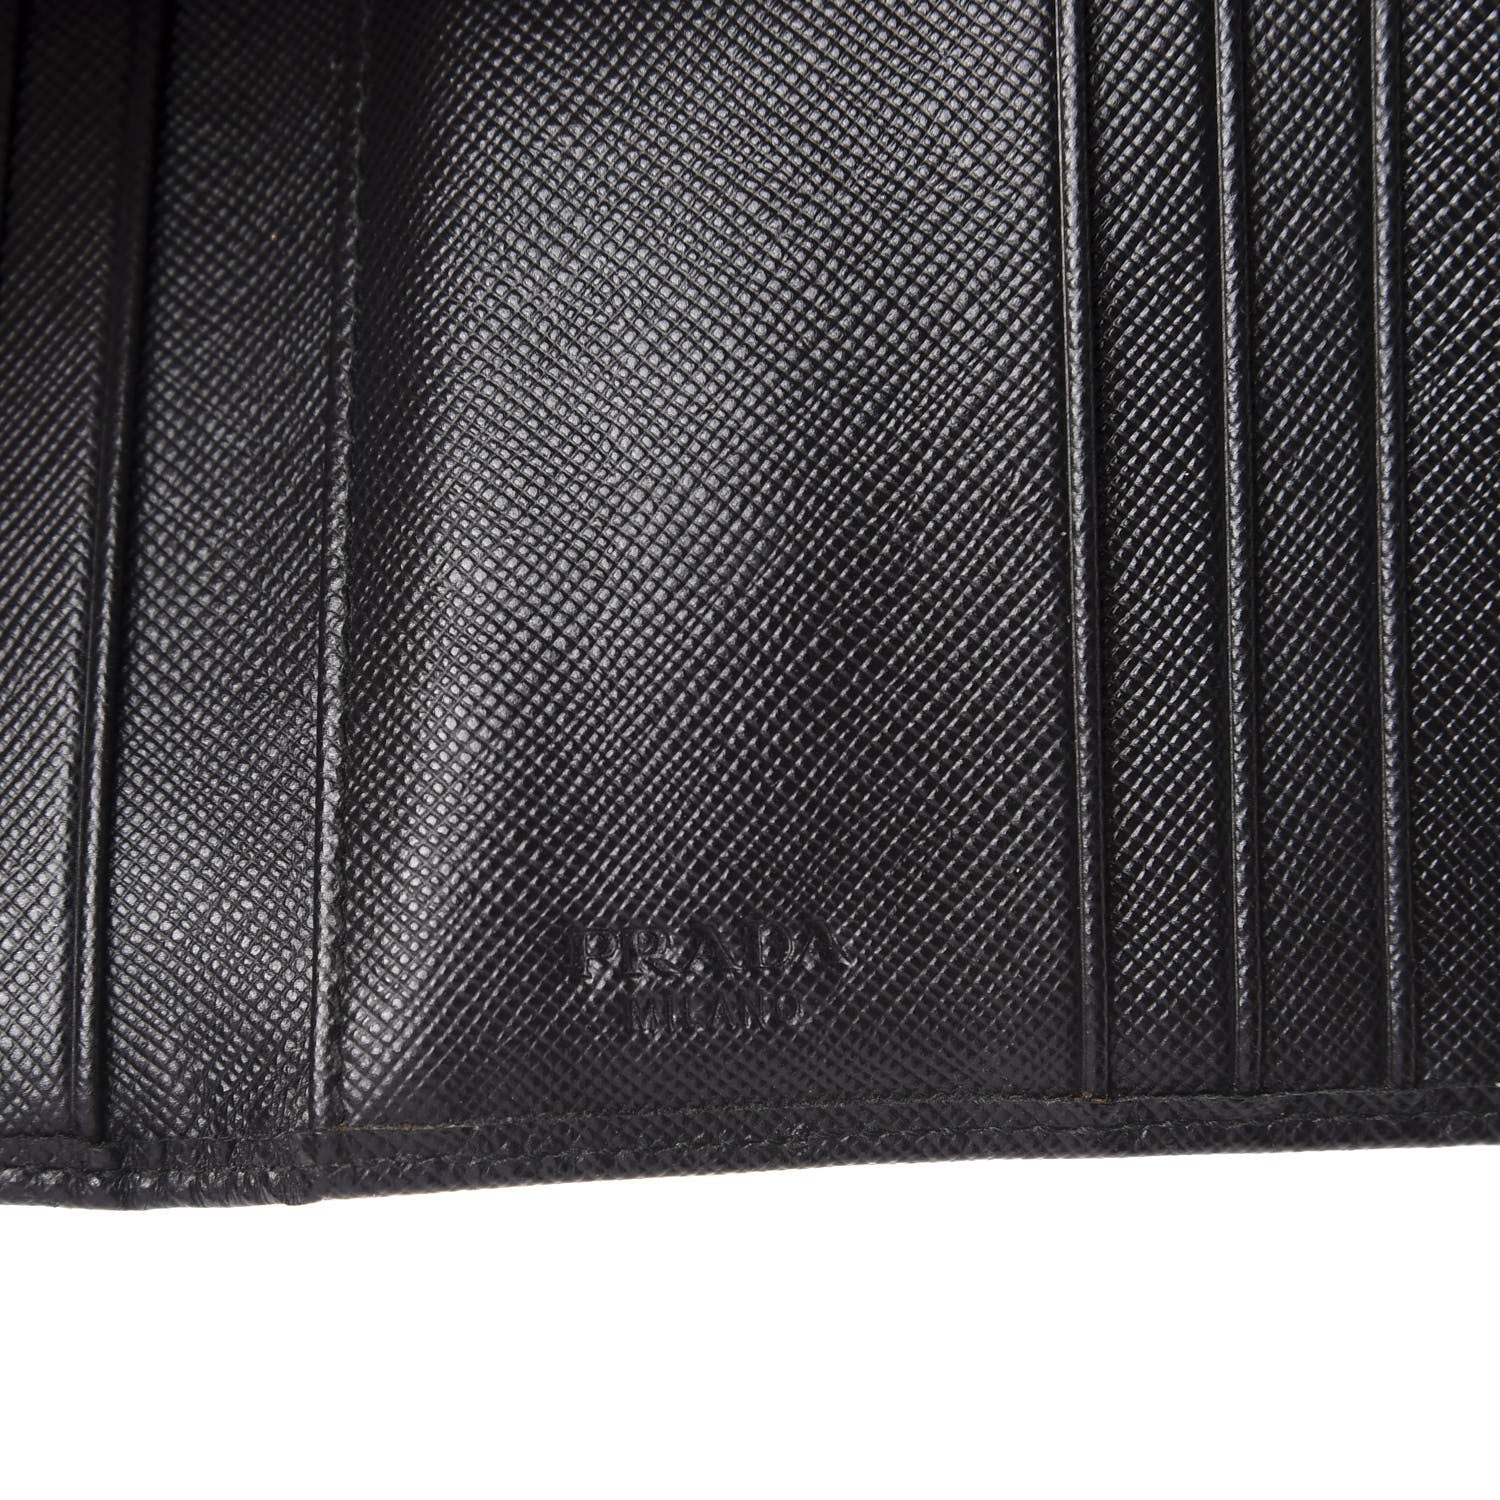 Prada Women's Wallet Saffiano Leather Bi Fold Black 1MH176 at_Queen_Bee_of_Beverly_Hills